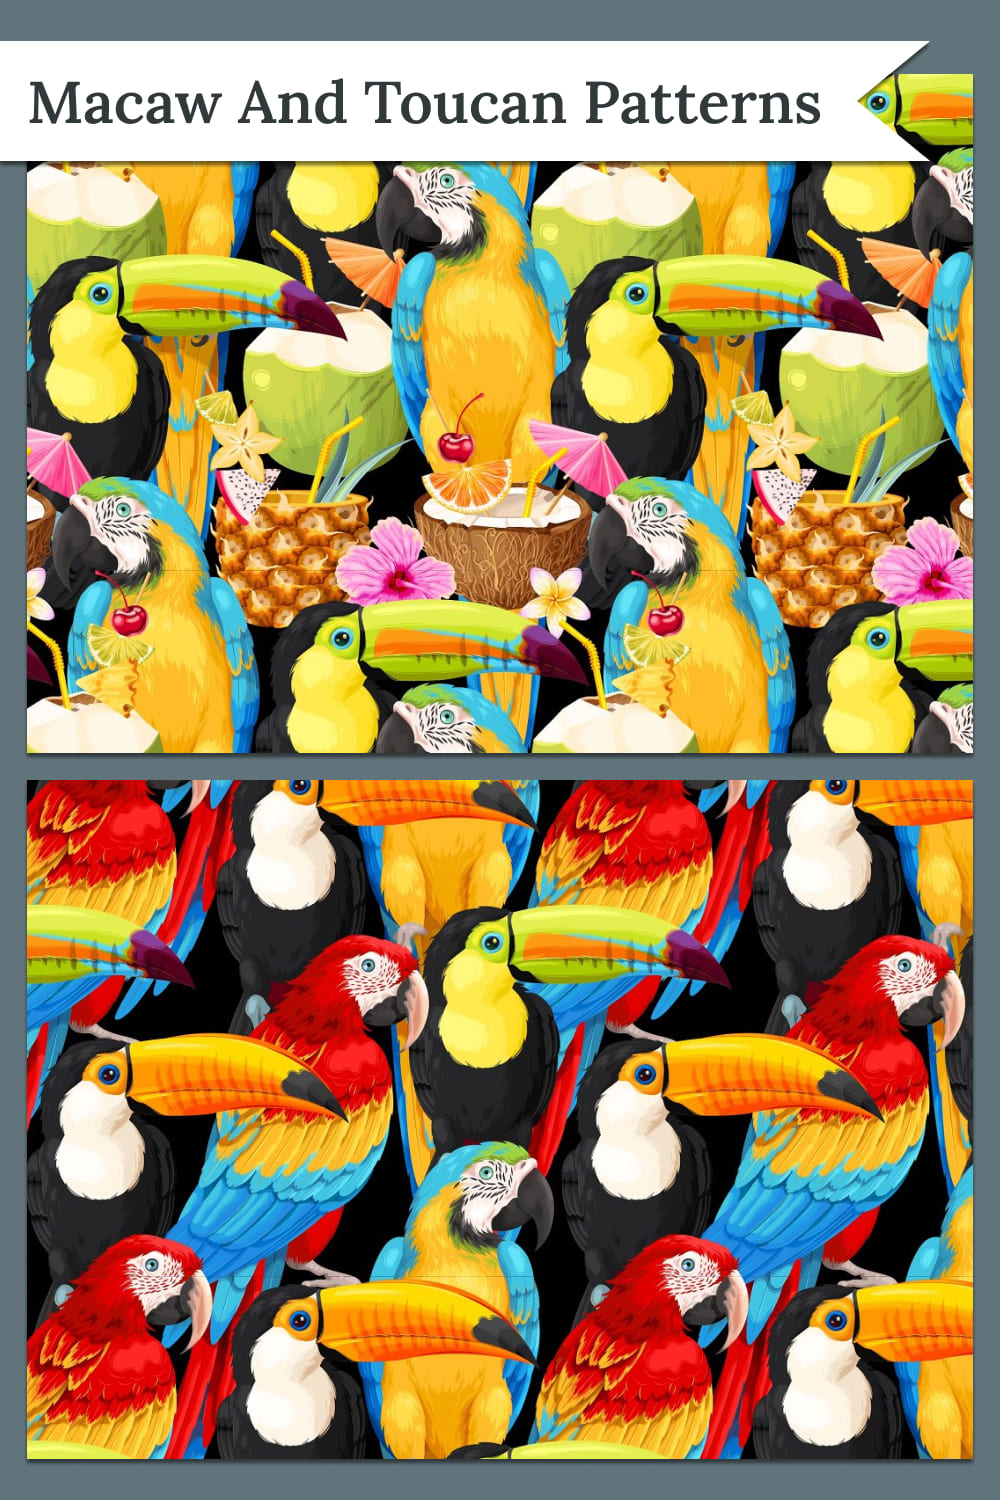 Macaw and toucan patterns - pinterest image preview.